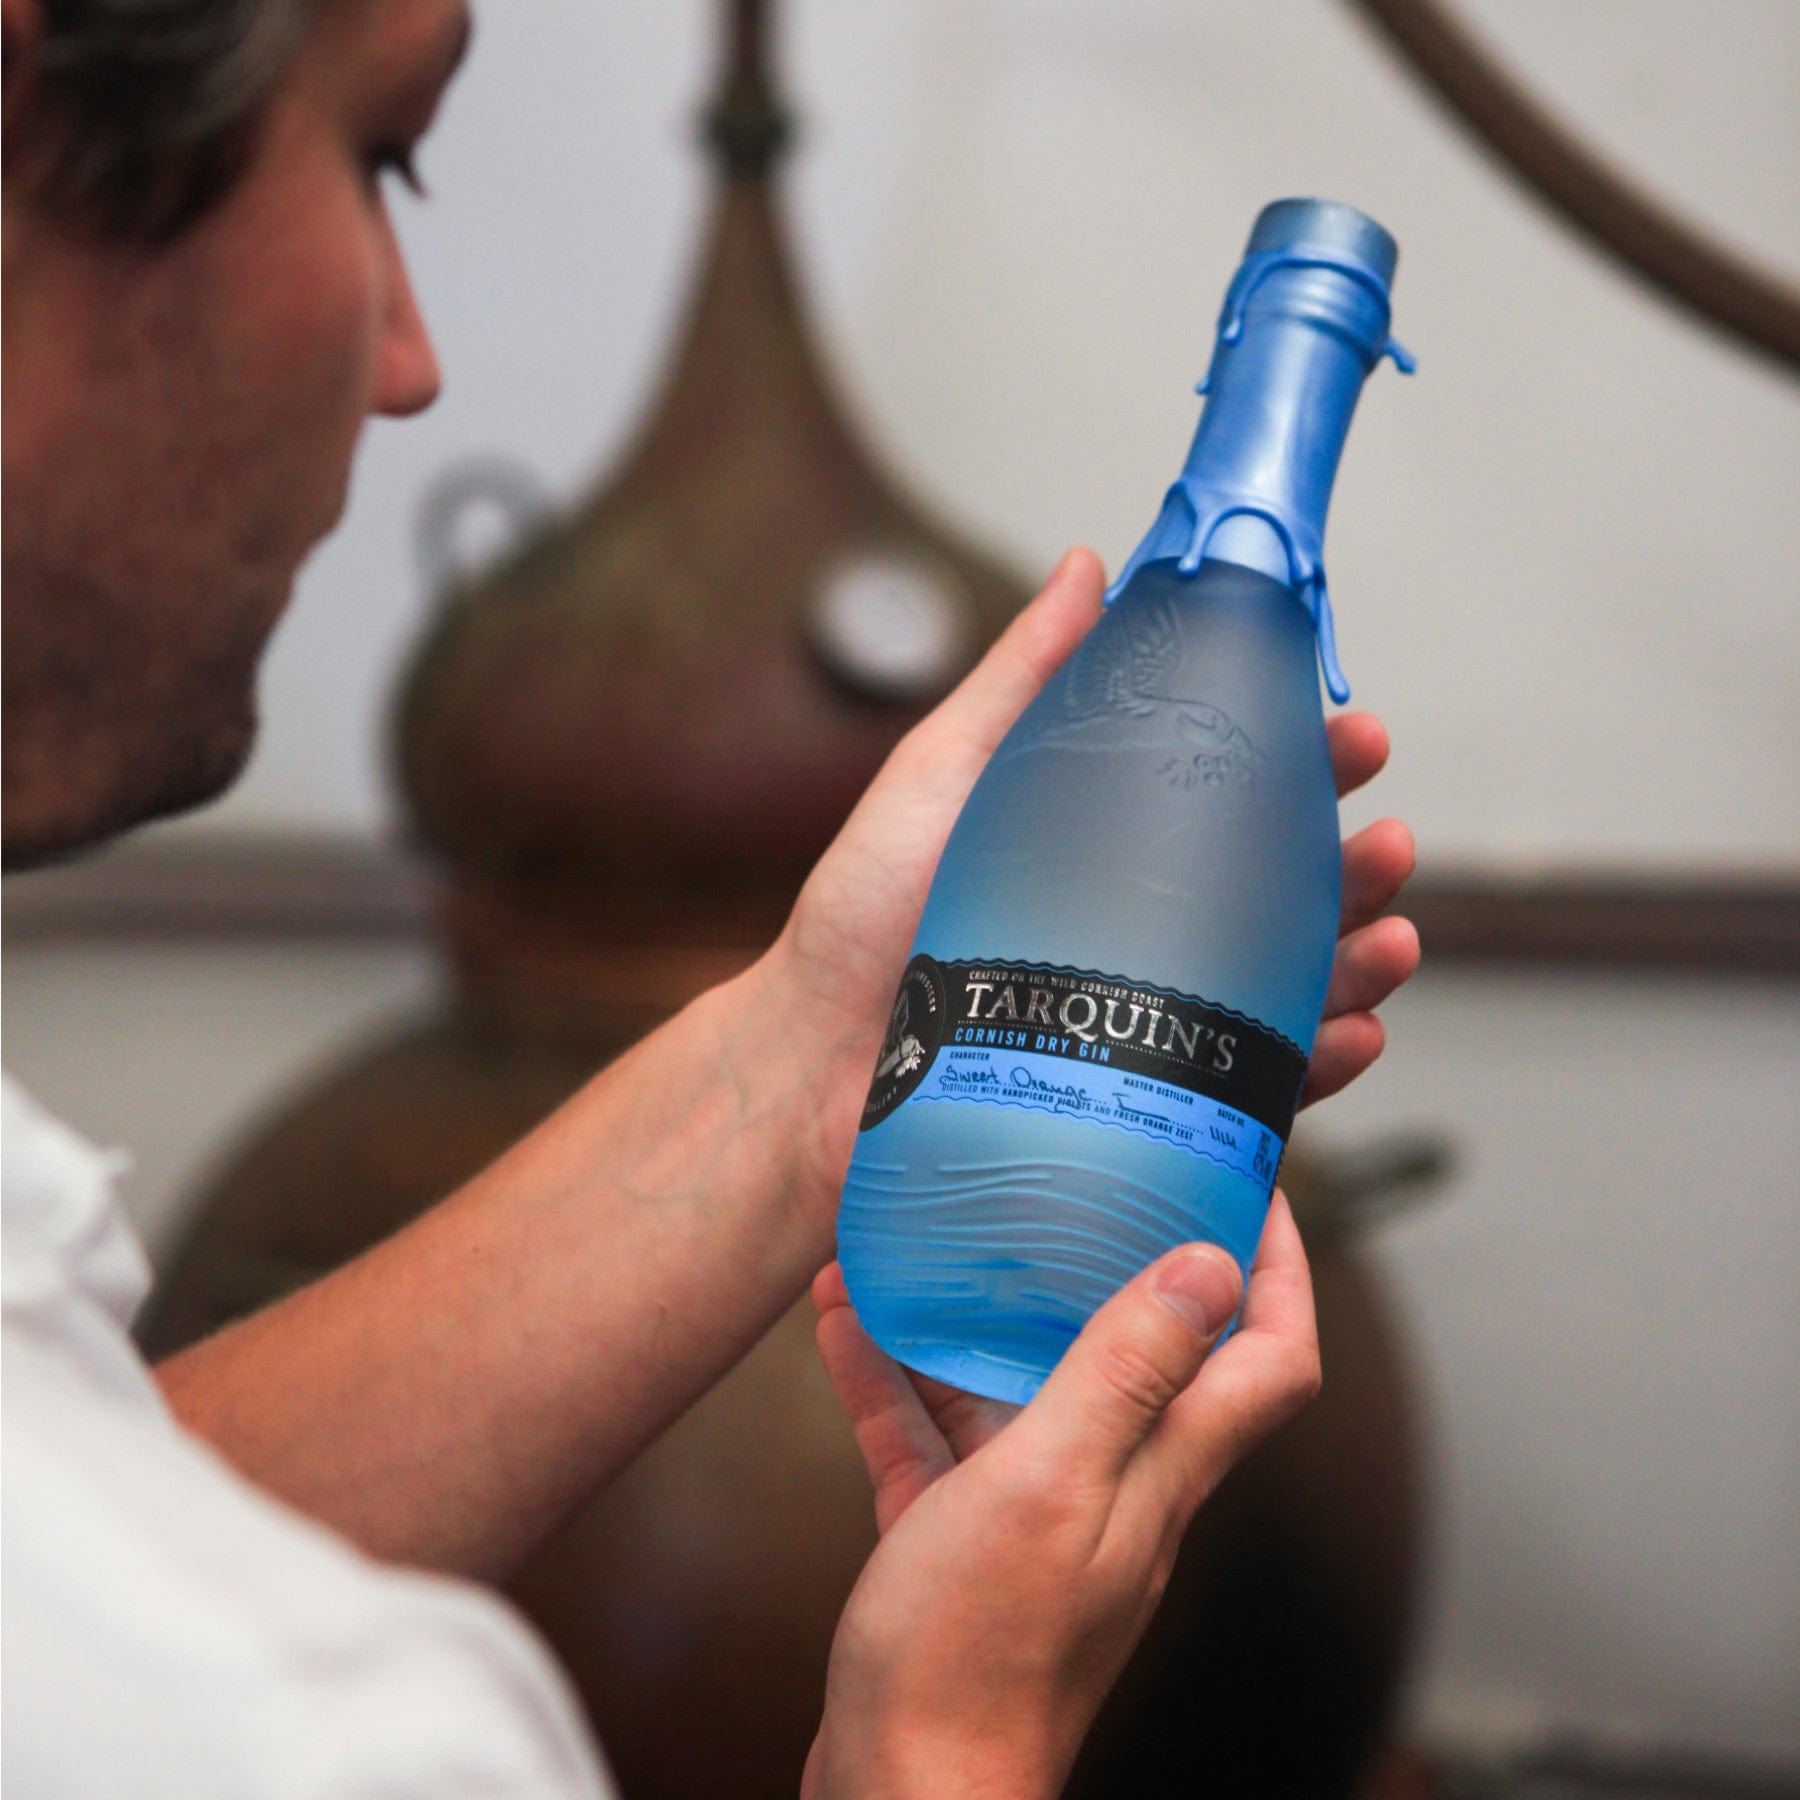 Man examining Tarquin's Cornish Gin bottle with intricate details in a distillery setting.